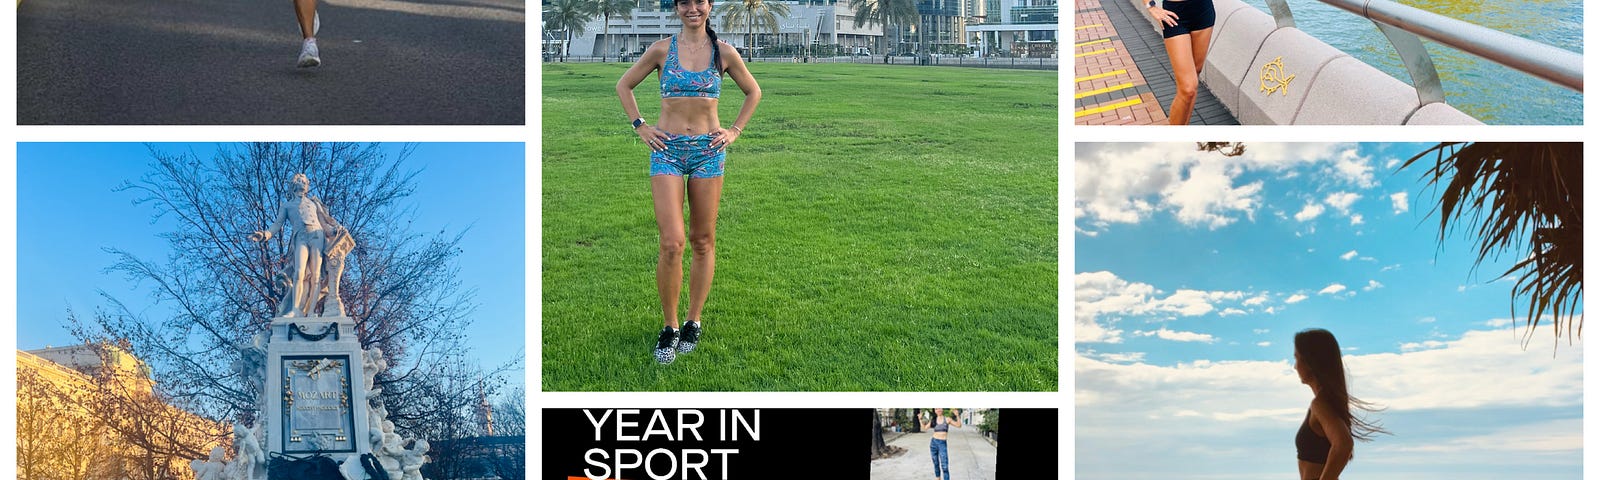 Pictures by the author around the world with running gear and a screenshot of the running stats